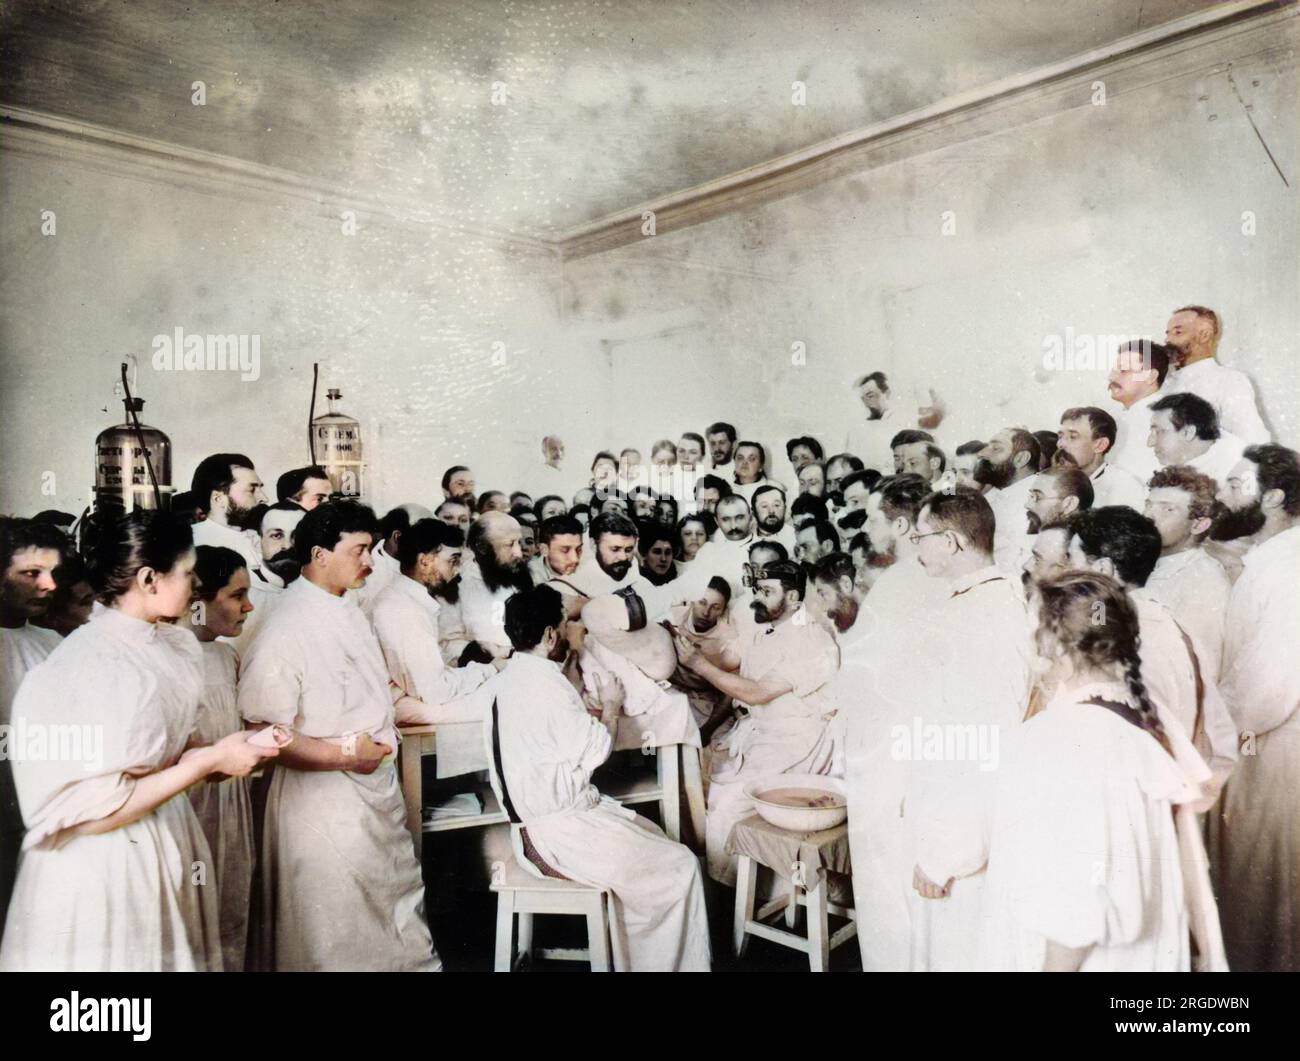 Early 20th century Gynaecological surgery taking place in front of a vast audience of Surgeons, would-be surgeons and nurses in the Obstetric Institute in St Petersburg, Russia. Stock Photo